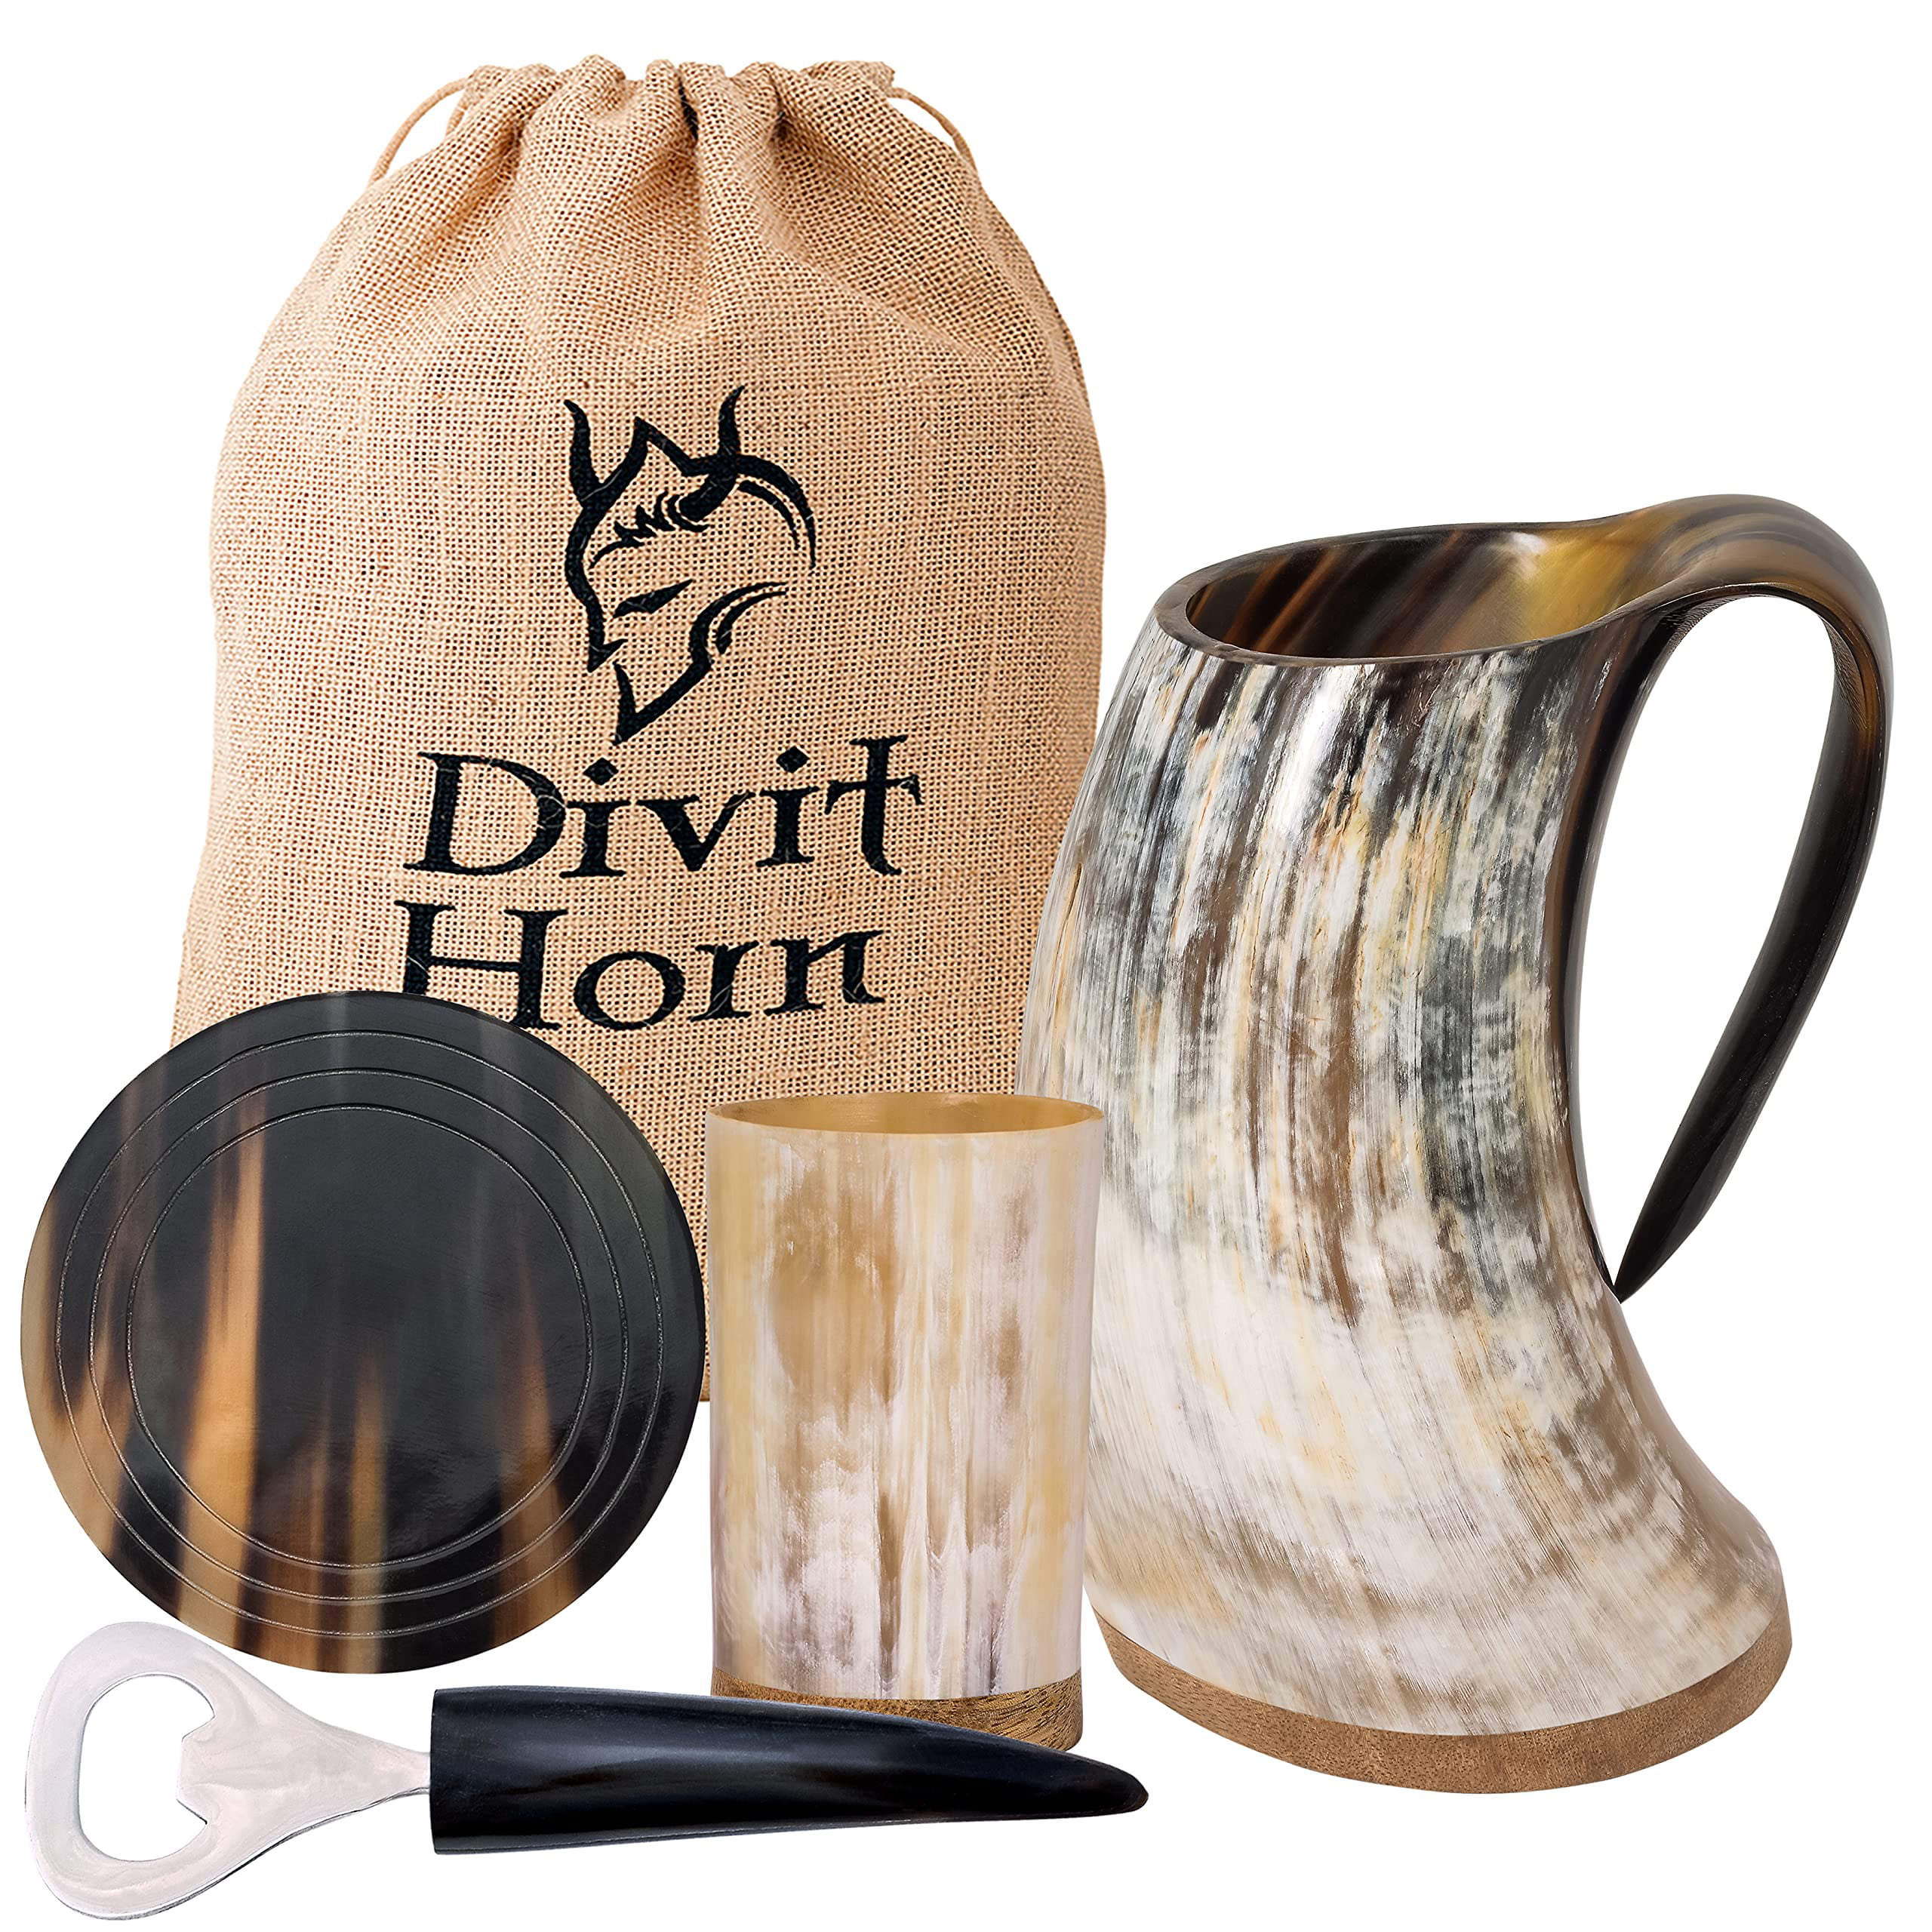 Viking-Drinking-Horn Mug With Brass Liner For Beer Wine Mead Ale Gift